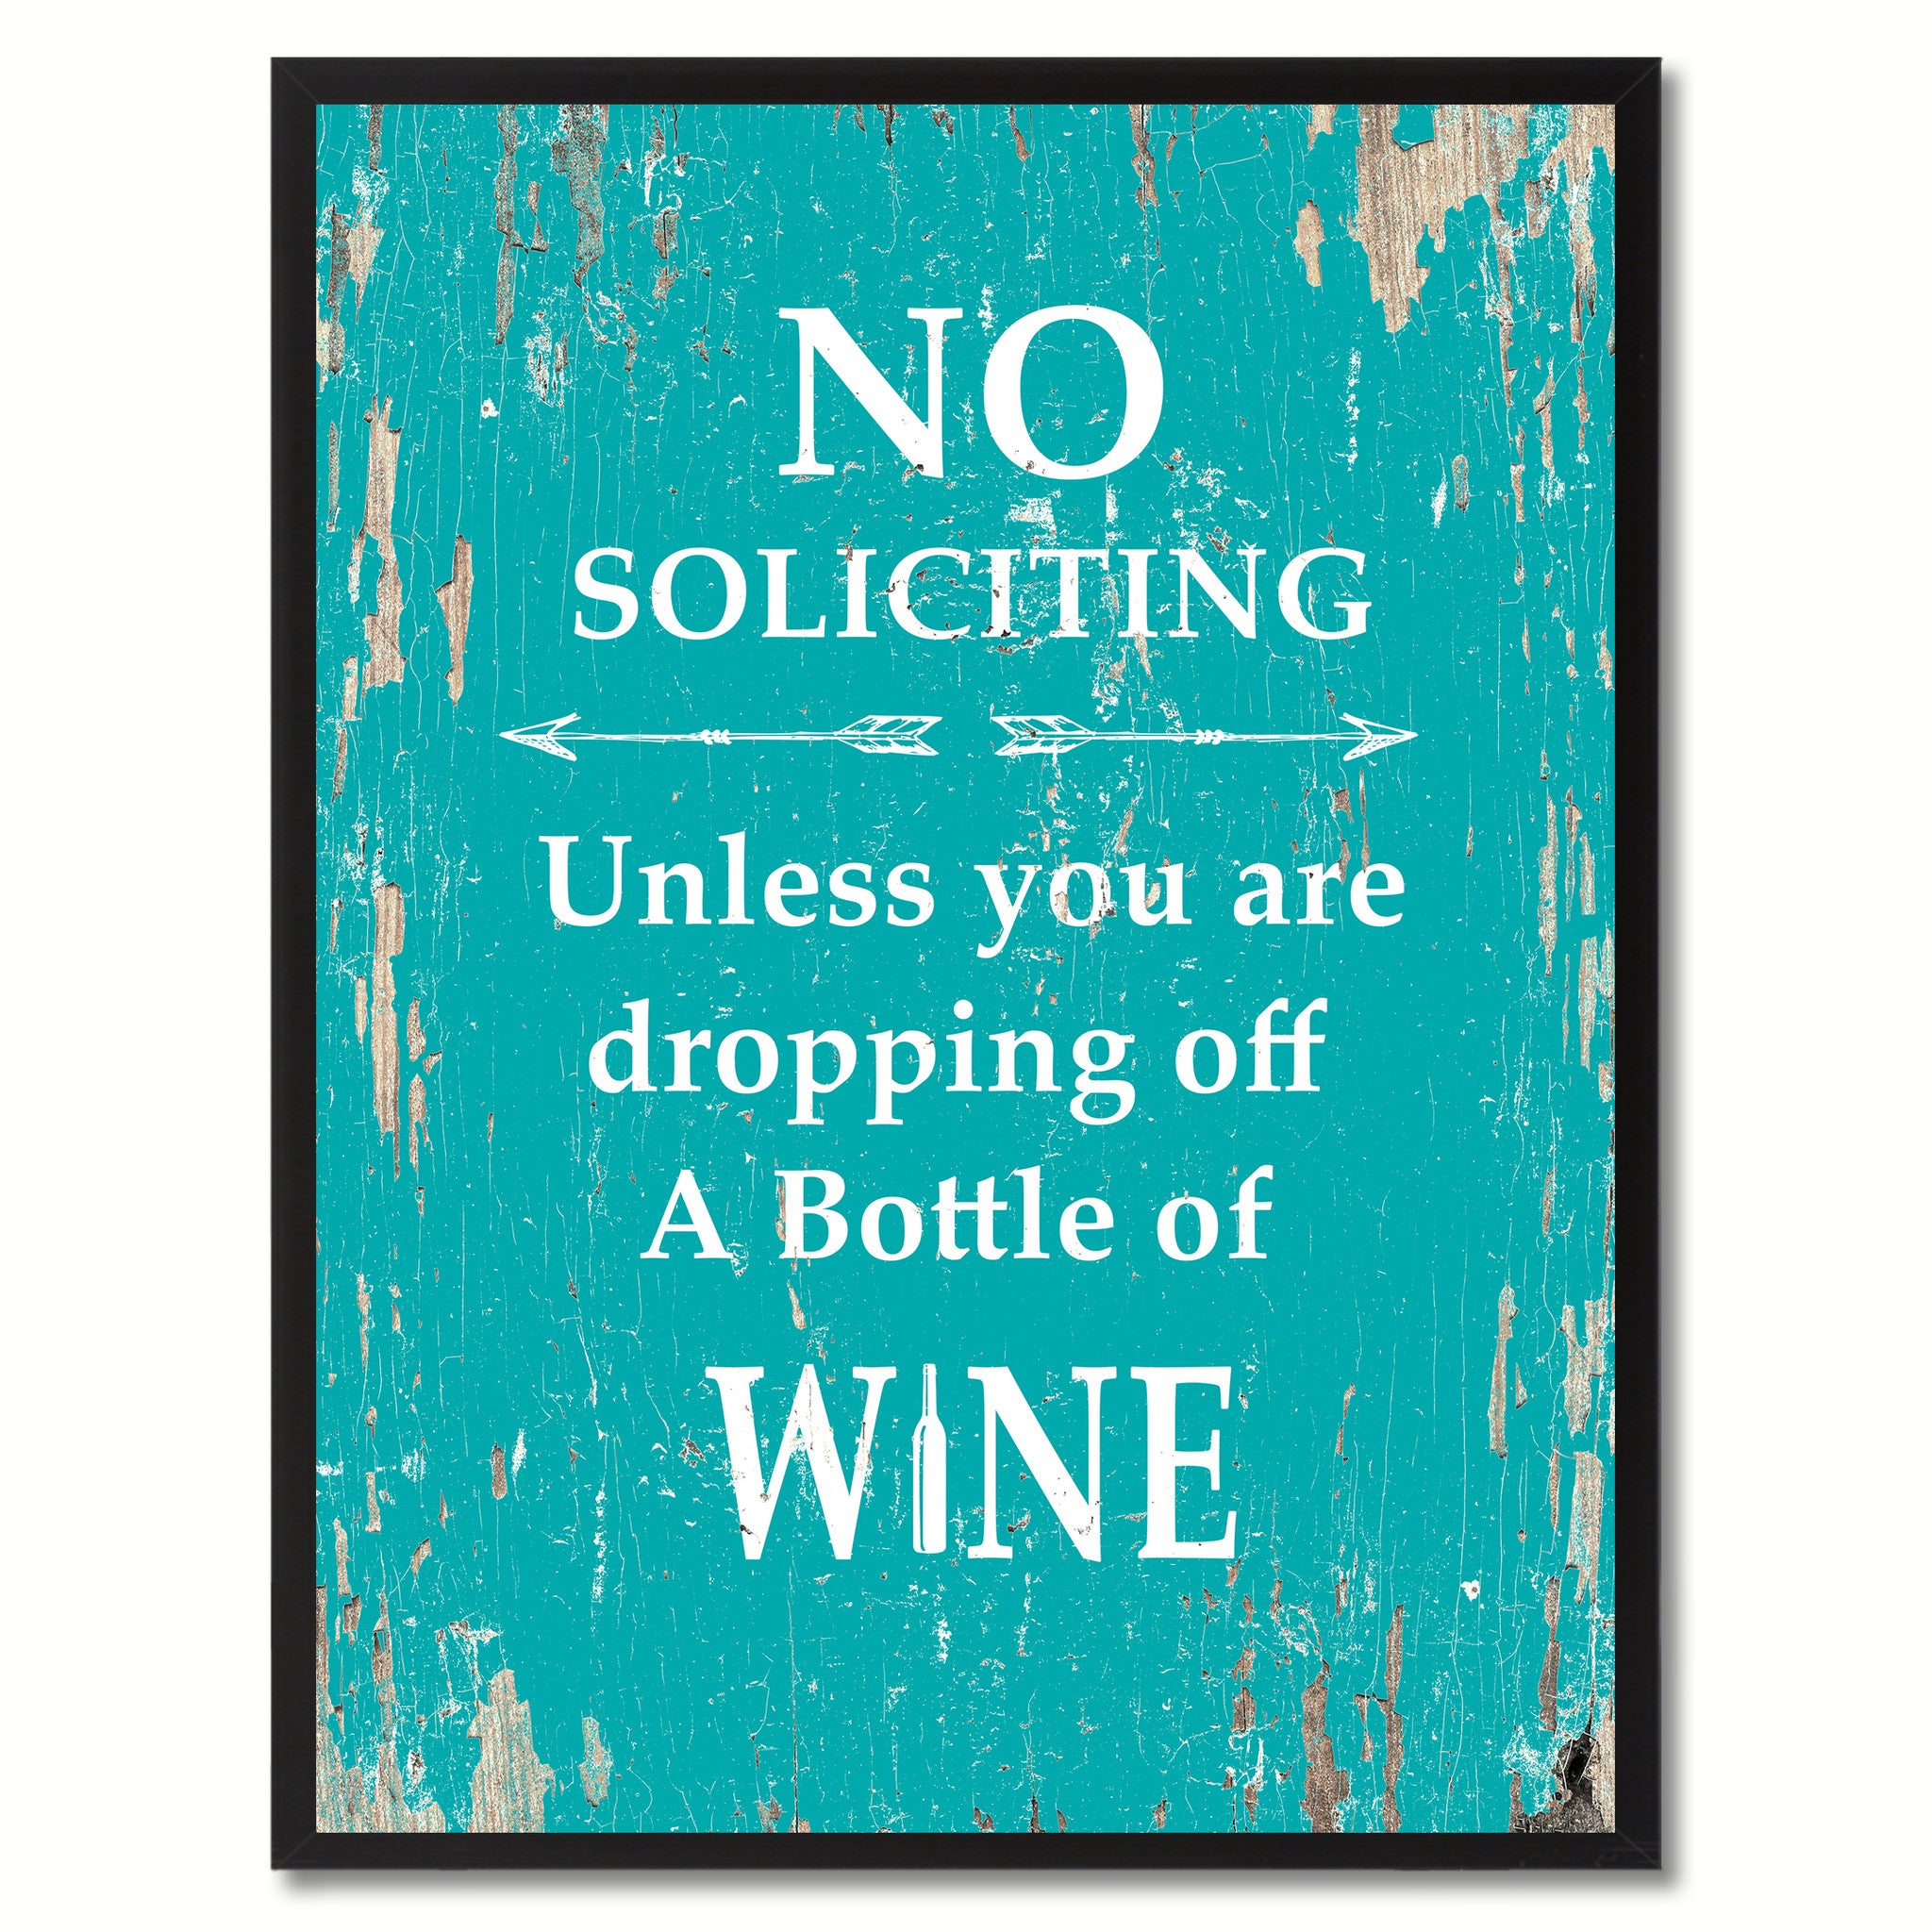 No Soliciting Unless You Are Dropping Off A Bottle Of Wine Saying Canvas Print, Black Picture Frame Home Decor Wall Art Gifts